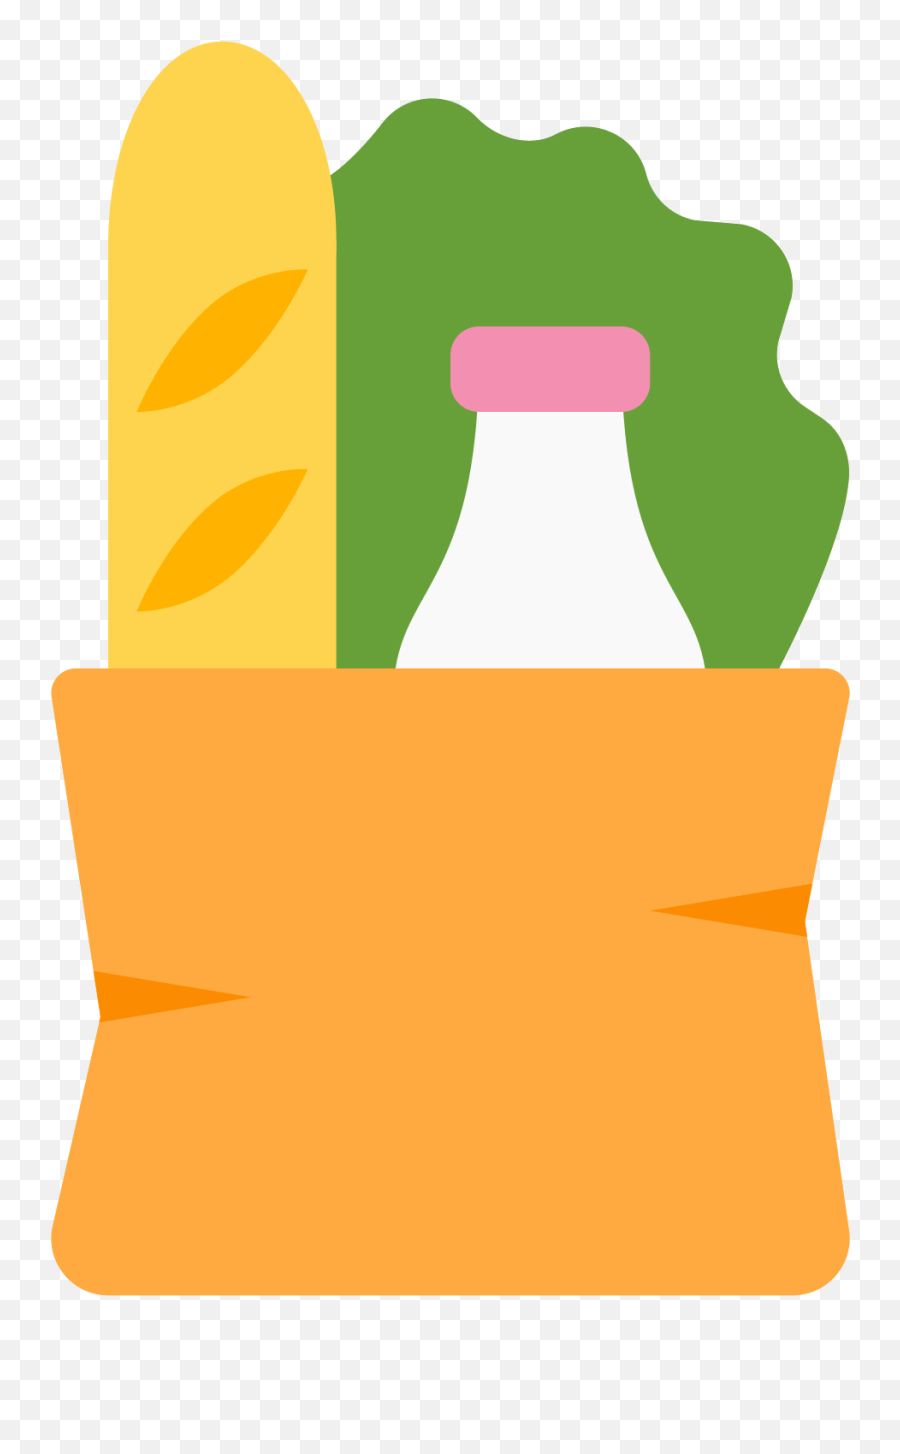 Groceries Vector Icon Transparent U0026 Png Clipart Free - Transparent Background Groceries Icon,Groceries Png